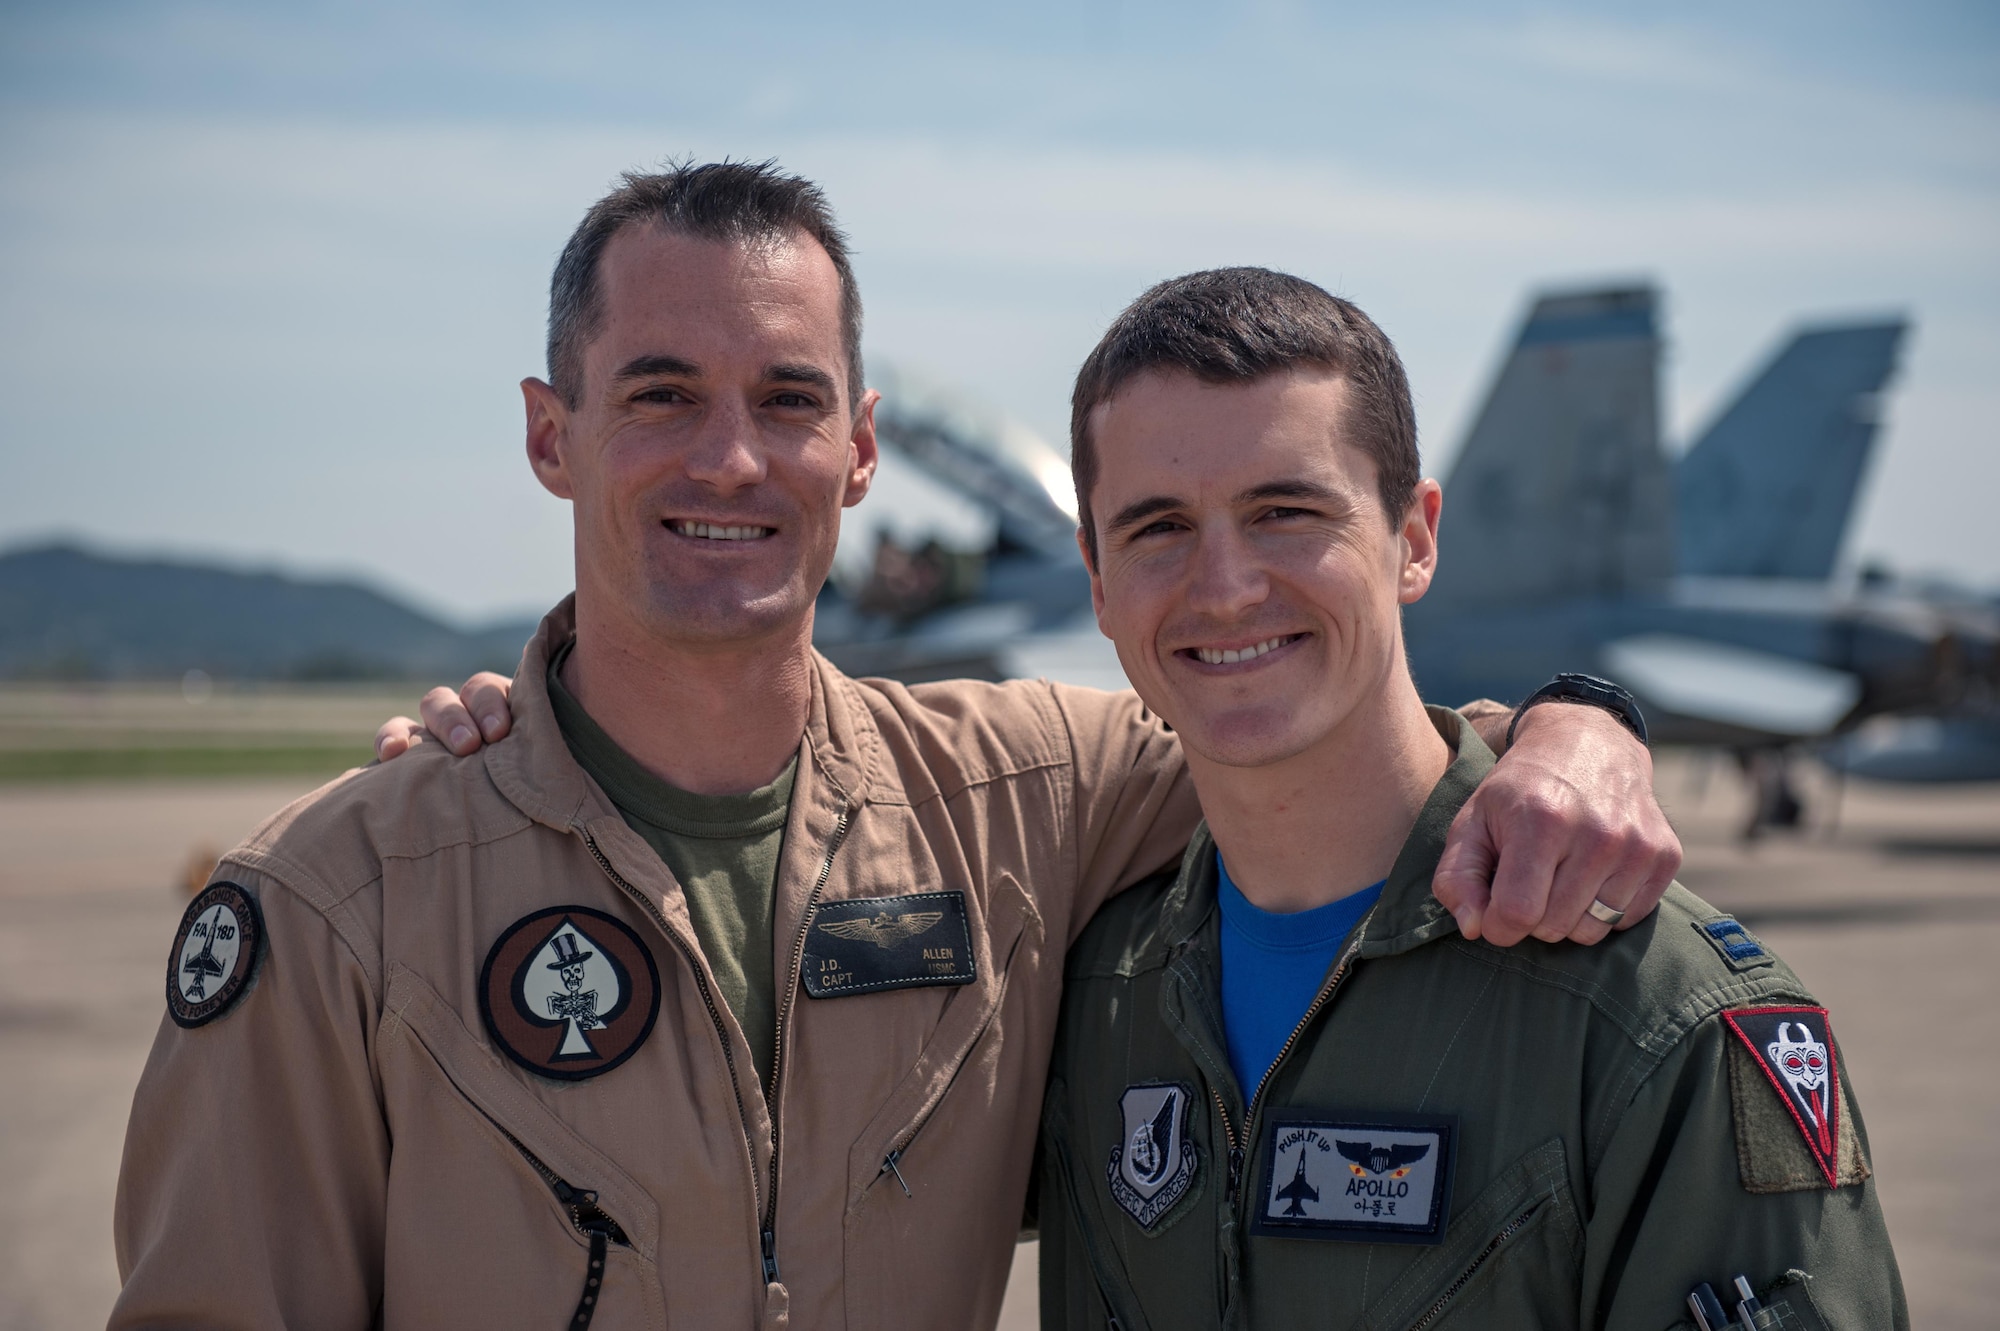 Marine Corps Capt. Jarrod Allen, a Marine Fighter Attack Squadron 225 F/A-18 Hornet pilot, and Air Force Capt. Jacob Allen, a 35th Fighter Squadron F-16 Fighting Falcon pilot, pose for a photo together during exercise Max Thunder 15-1 at Gwangju Air Base, South Korea, April 17, 2015. (U.S. Air Force photo/Senior Airman Taylor Curry)